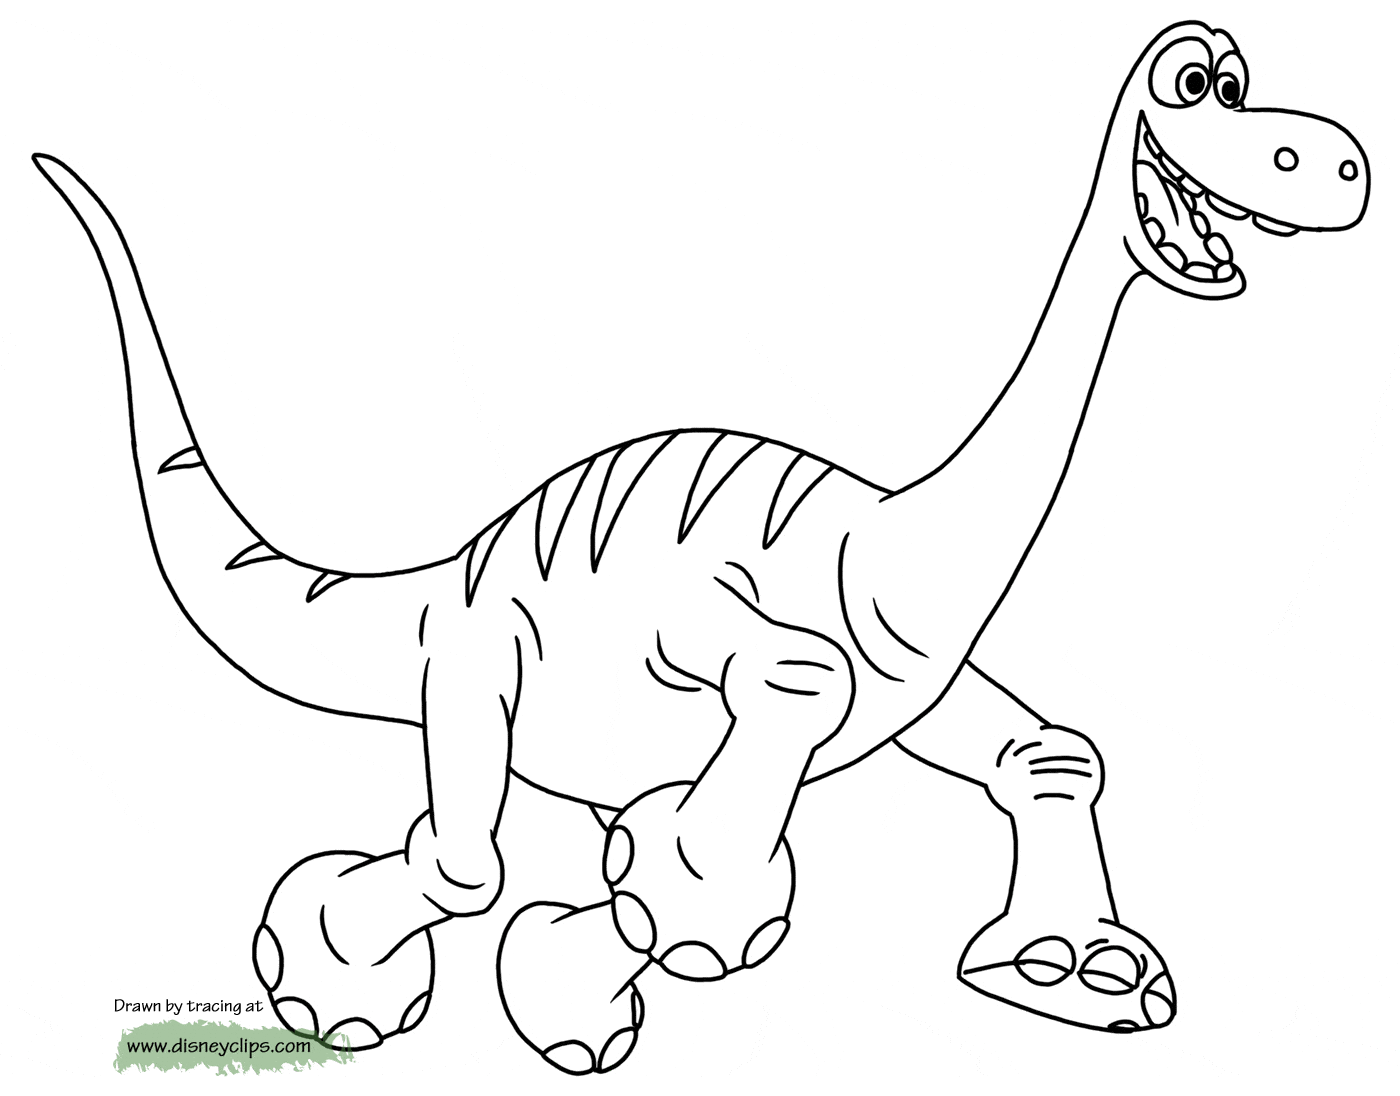 The Good Dinosaur Printable Coloring Pages | Disney Coloring Book